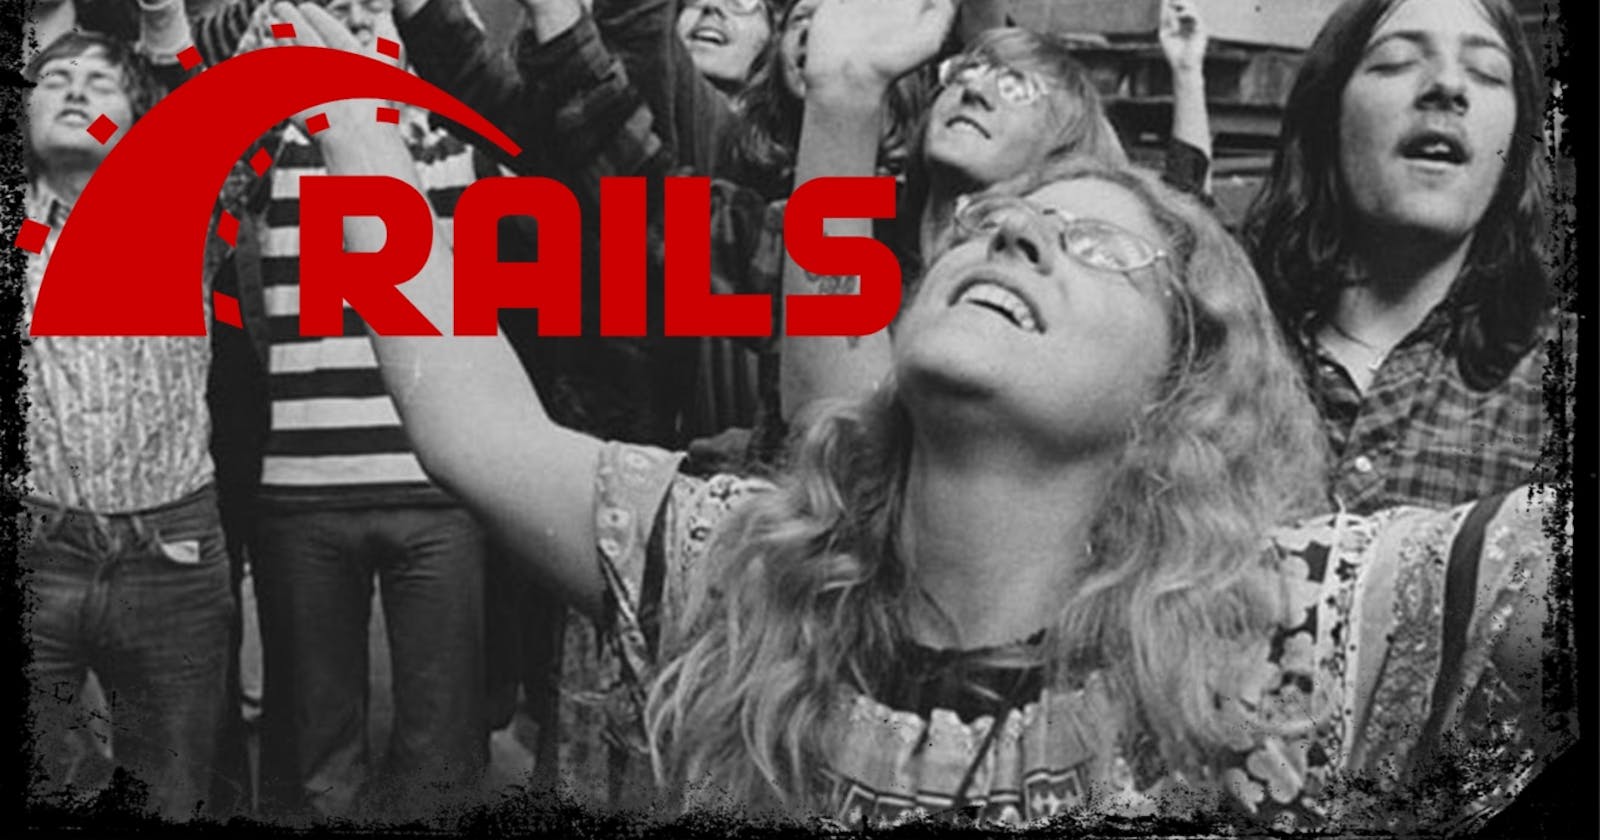 Rails are a cult